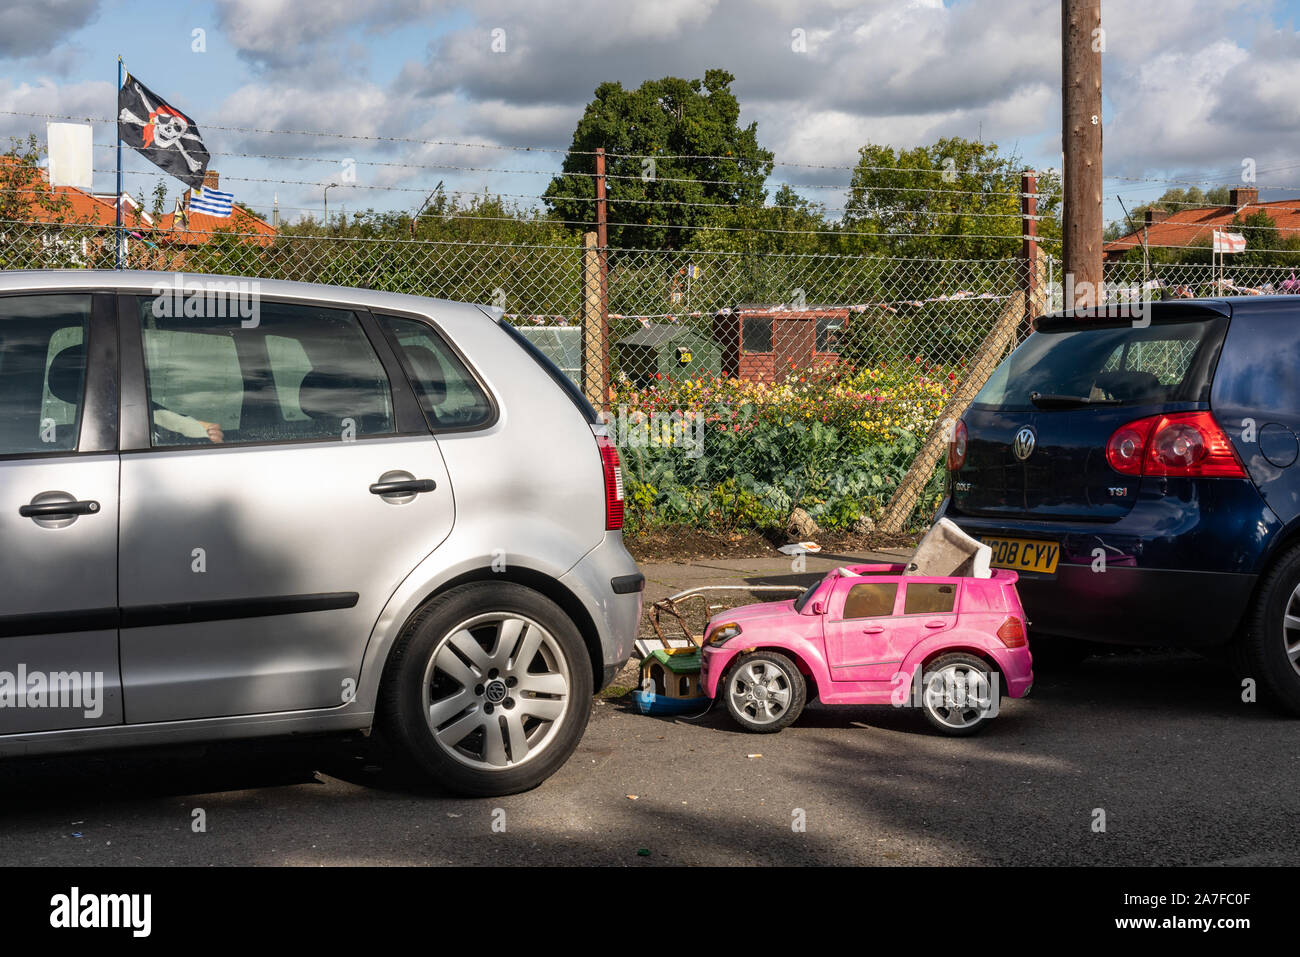 A dumped Childs toy car is sitting between two hatchback cars on the Watling Estate in North London UK Stock Photo